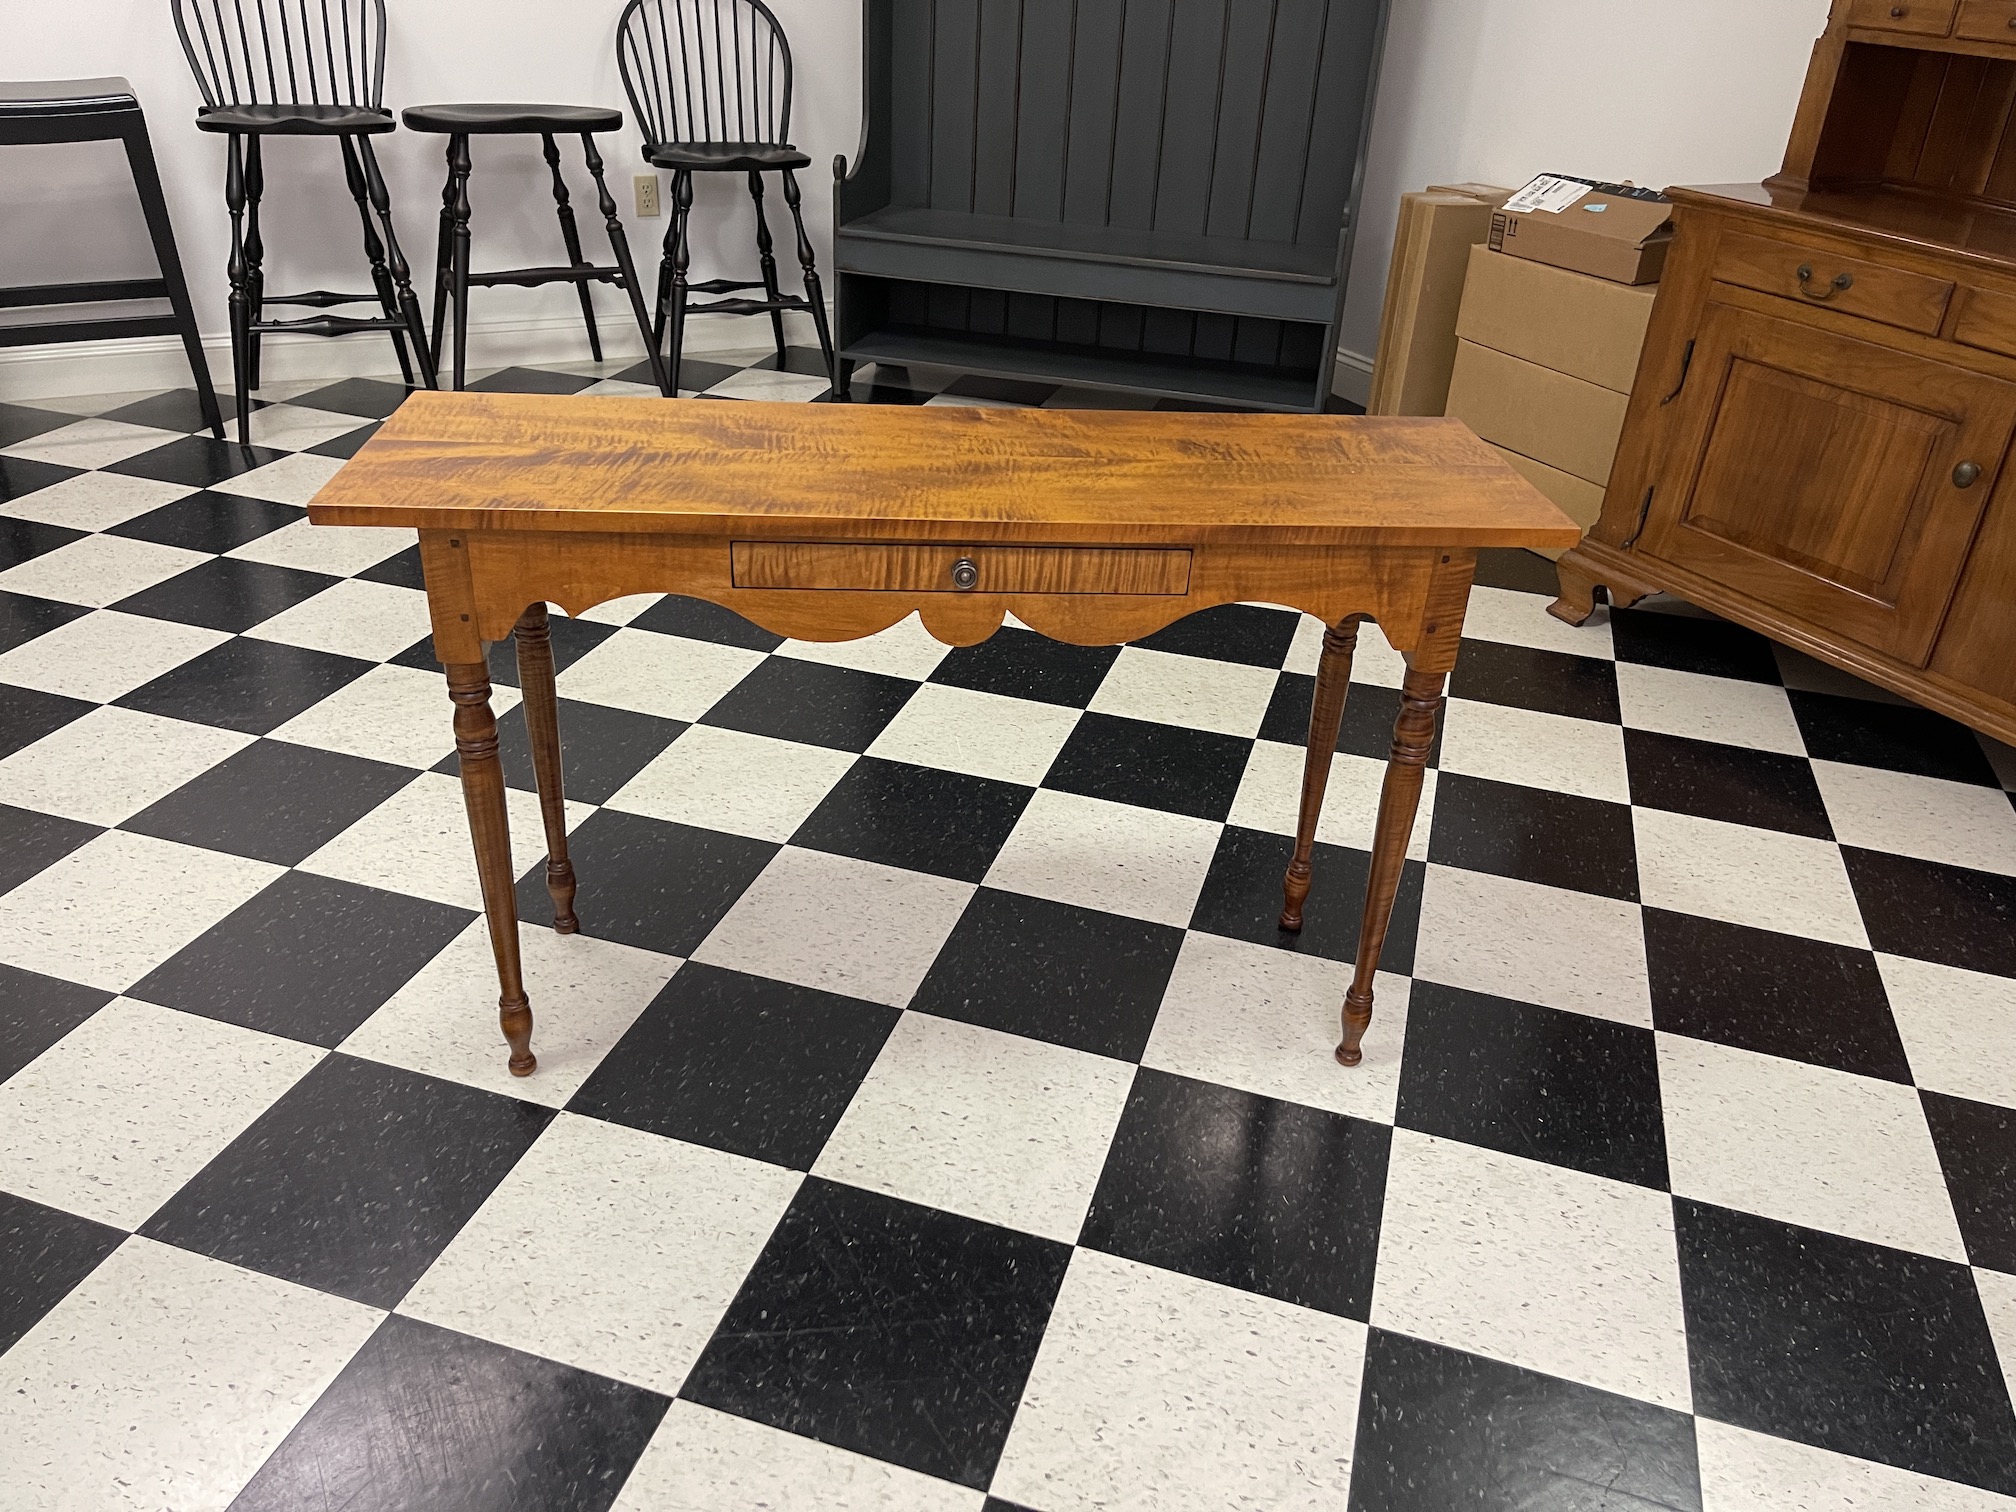 New Model Tiger Maple Hall Table with Drawer and Scalloped Skirt Image